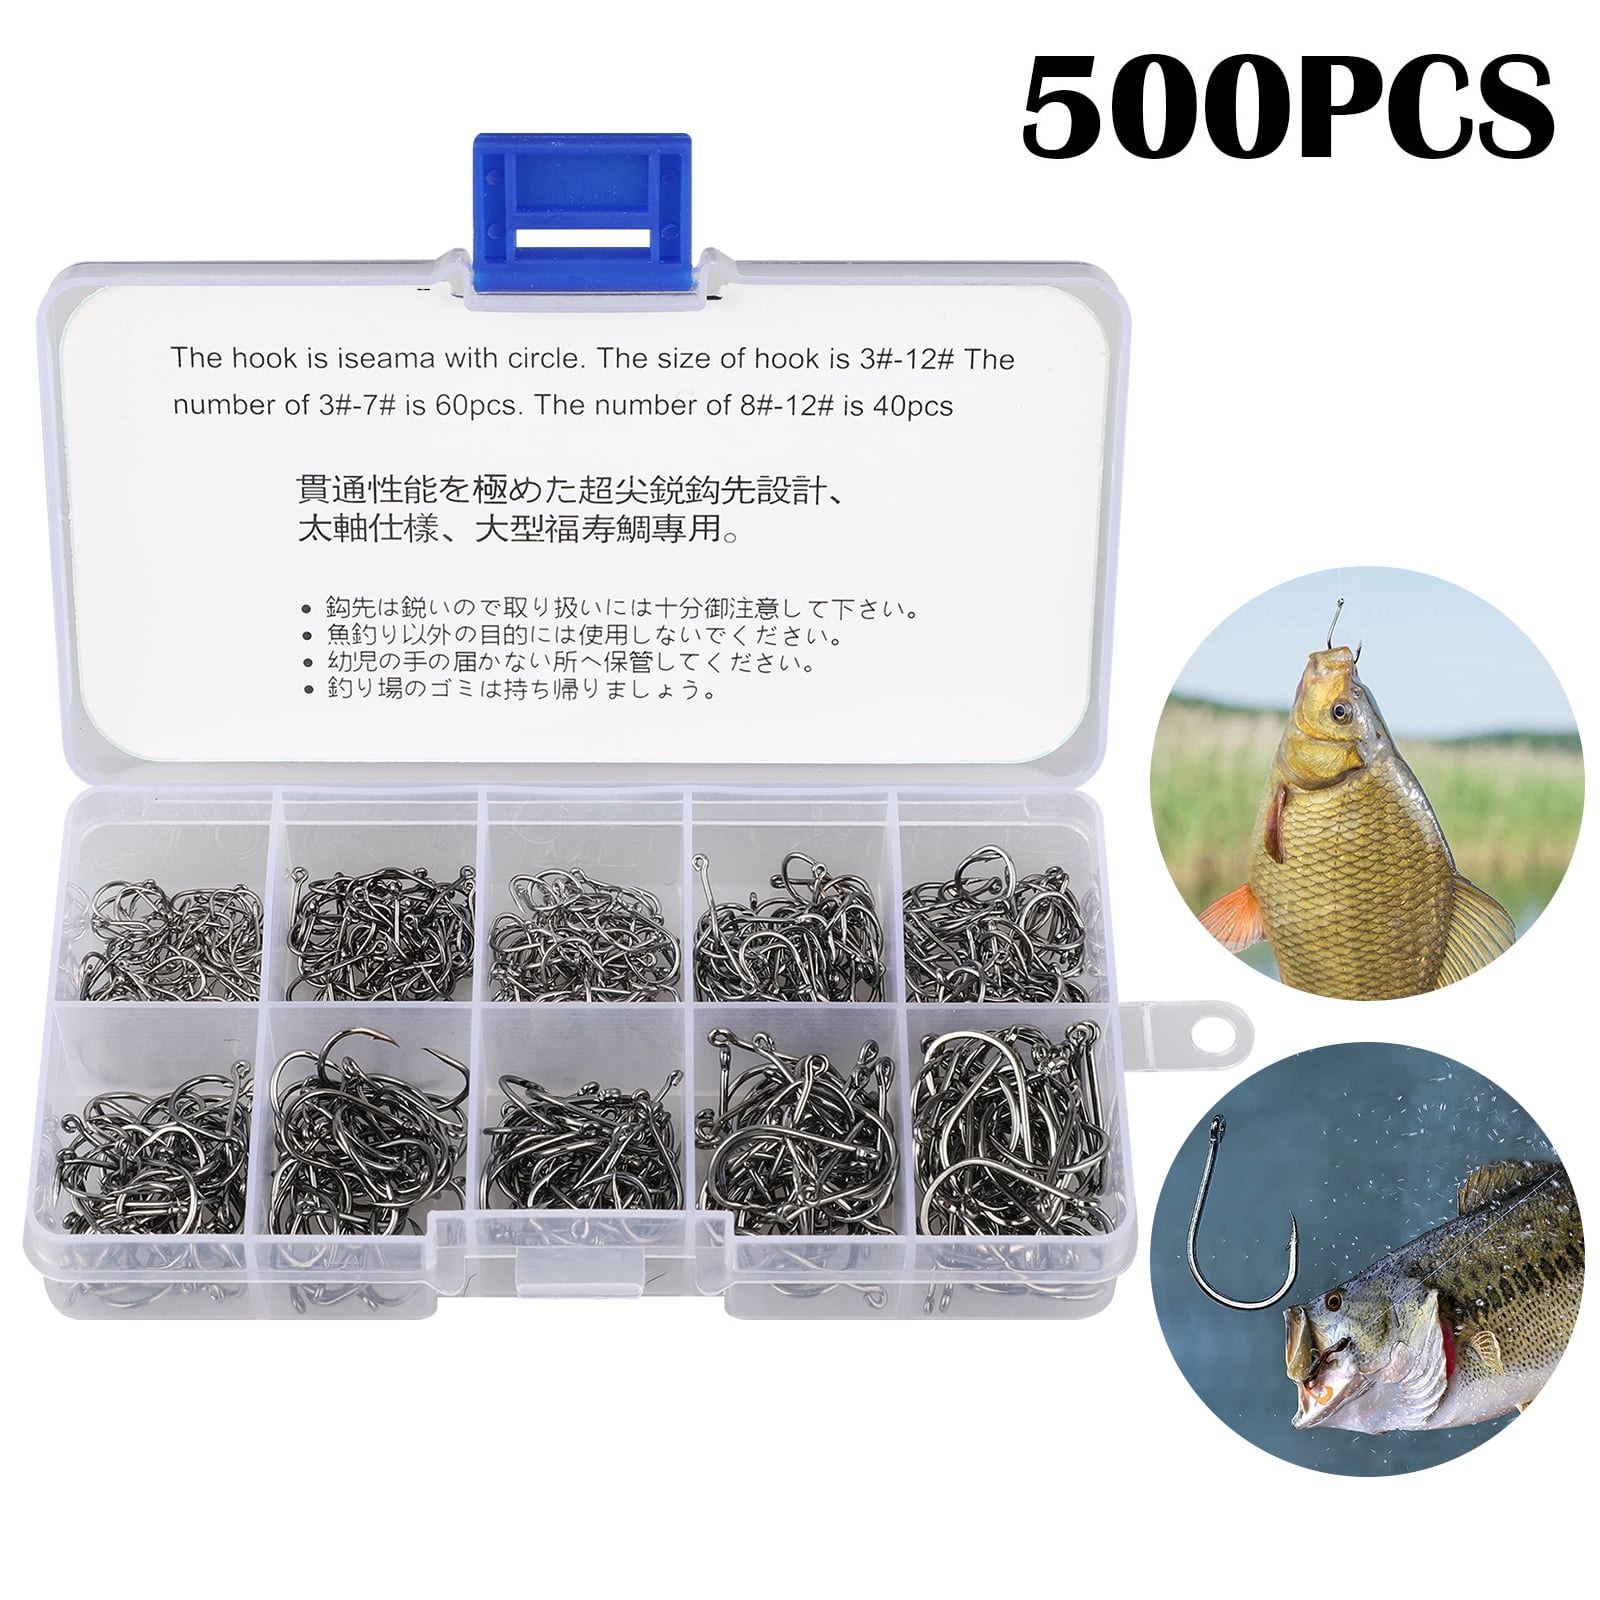 10 Sizes 100 Pieces Barbed Fishing Hooks for Course Carp Freshwater in Box 